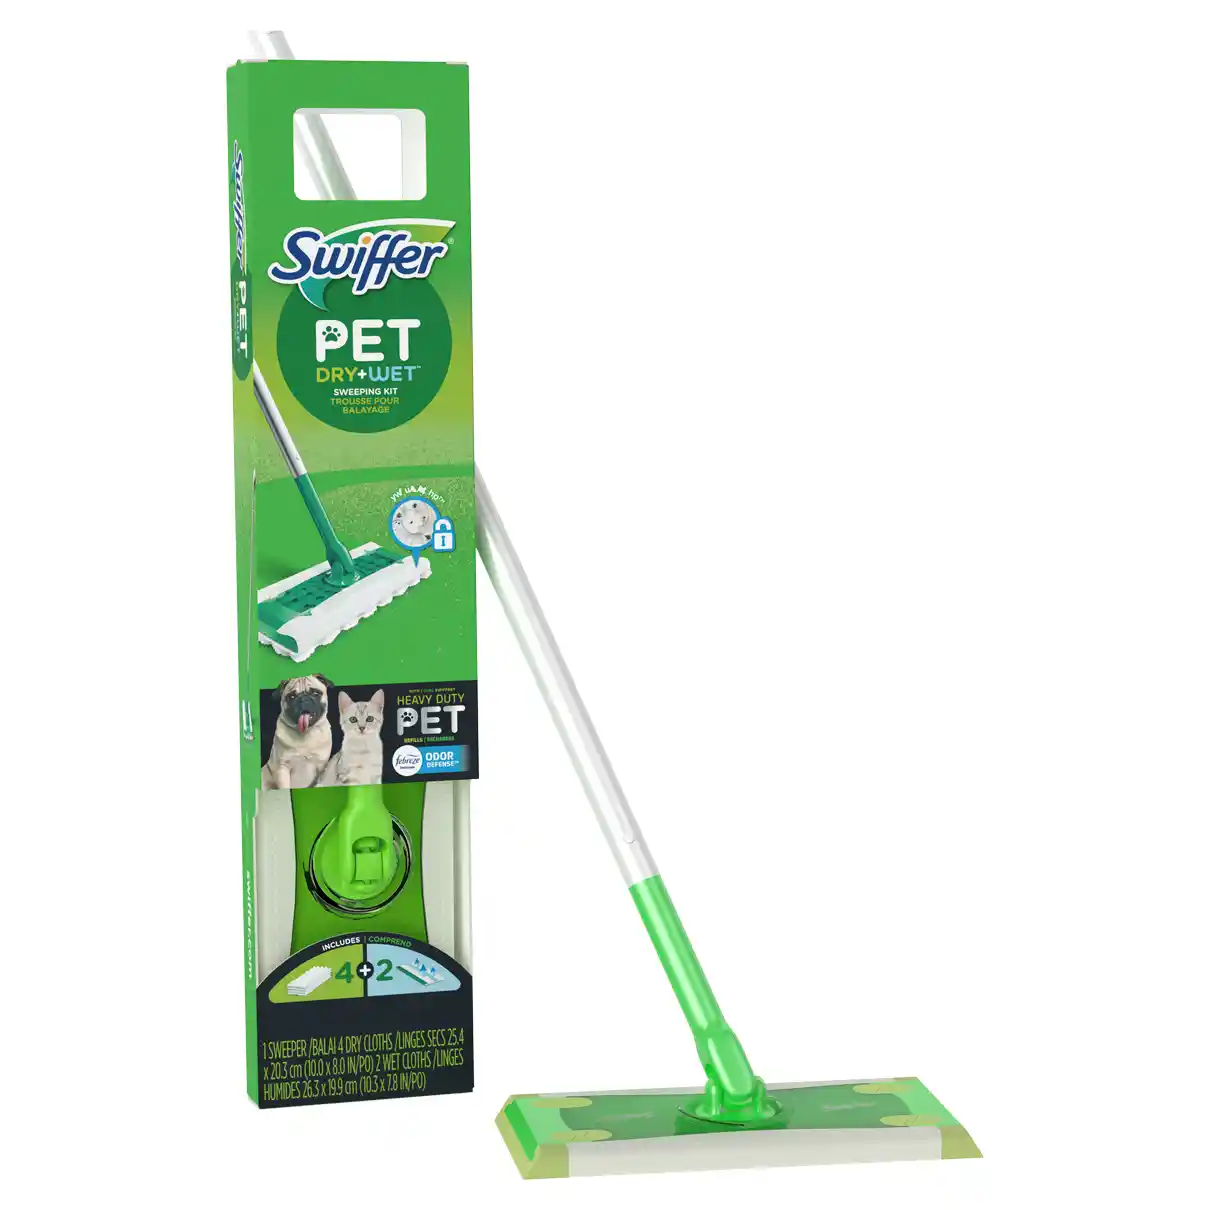 Swiffer® Sweeper™ Pet 2-in-1, Dry and Wet Multi-Surface Floor Sweeping and Mopping Starter Kit